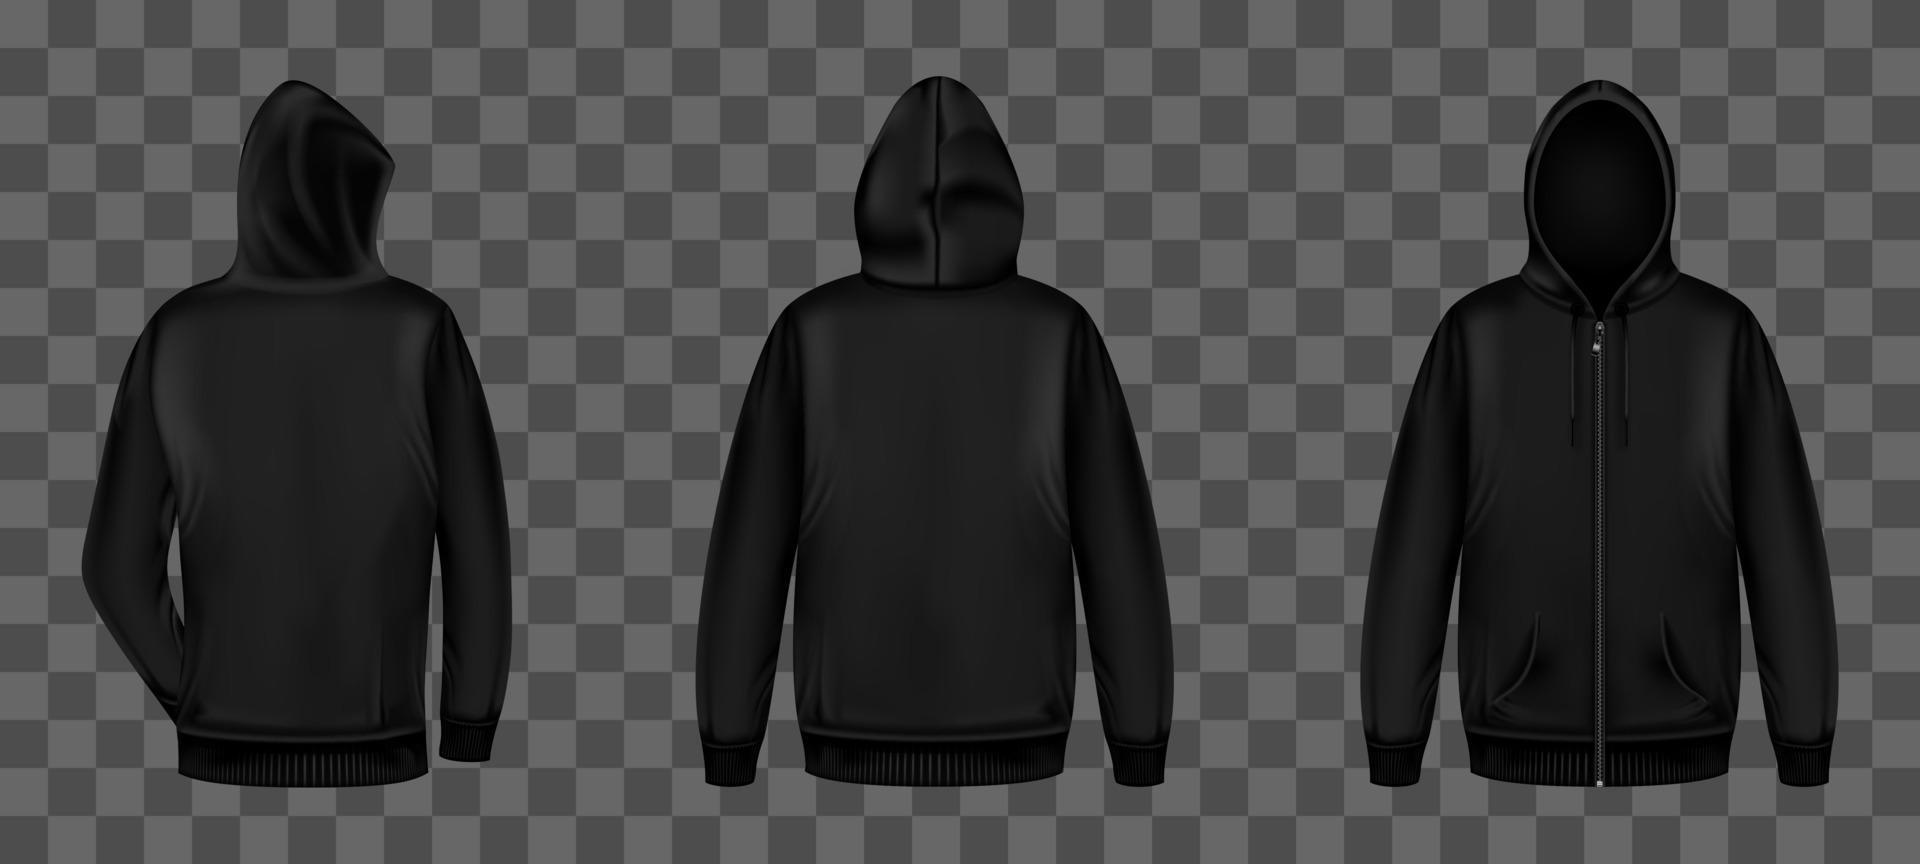 Black sweatshirt with zipper front and back view vector